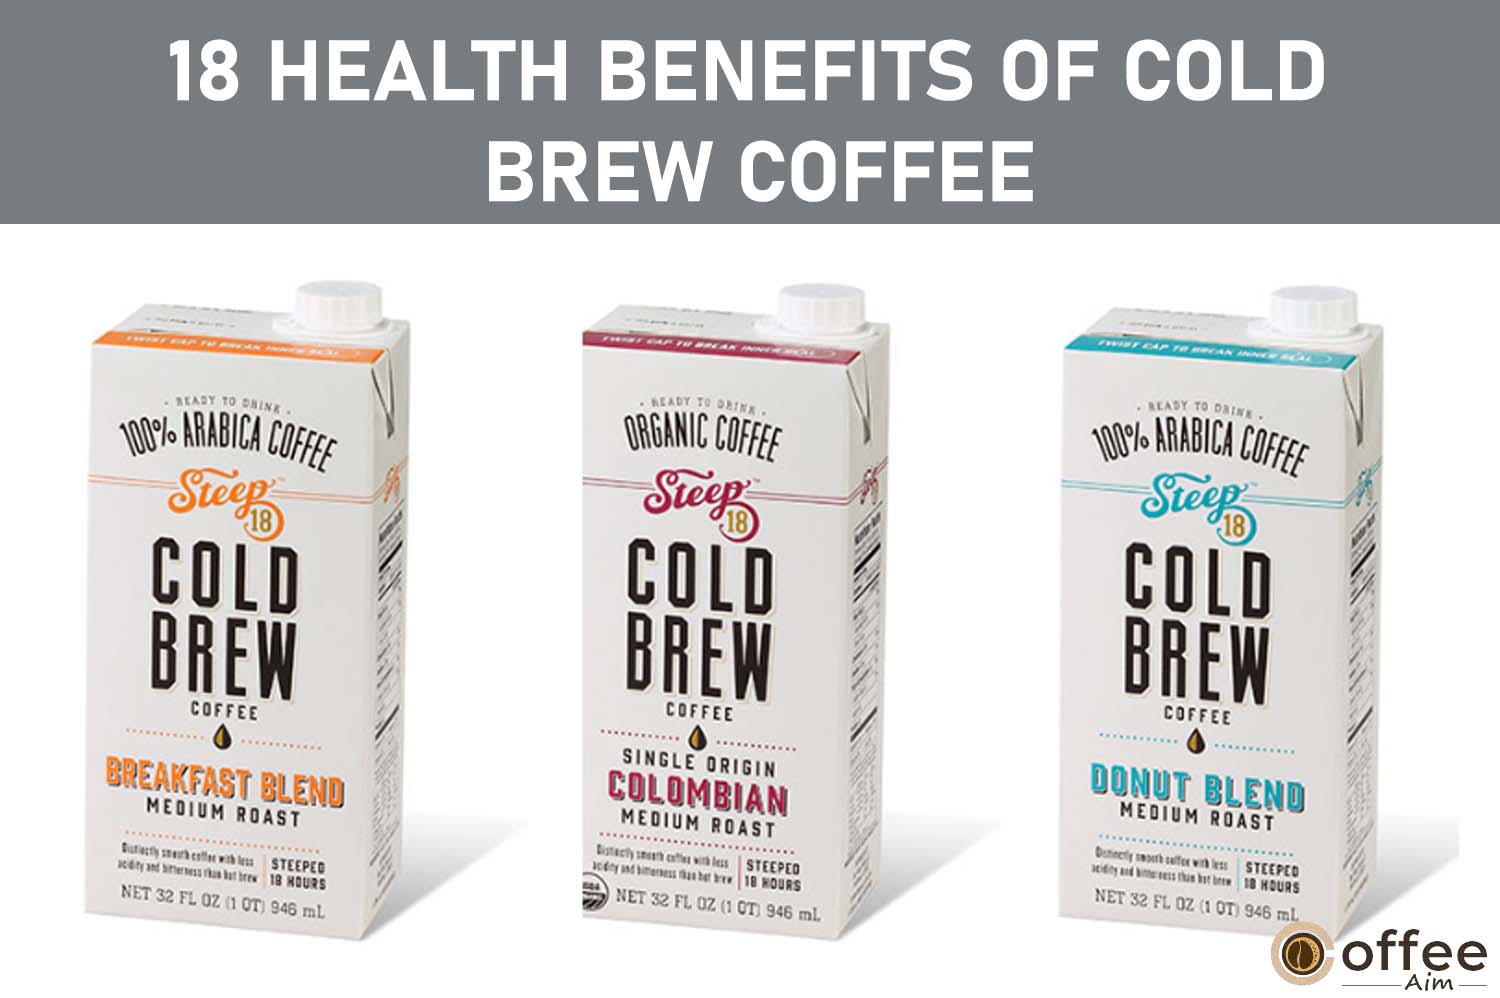 Featured image for the article "18 Health Benefits of Cold Brew Coffee"